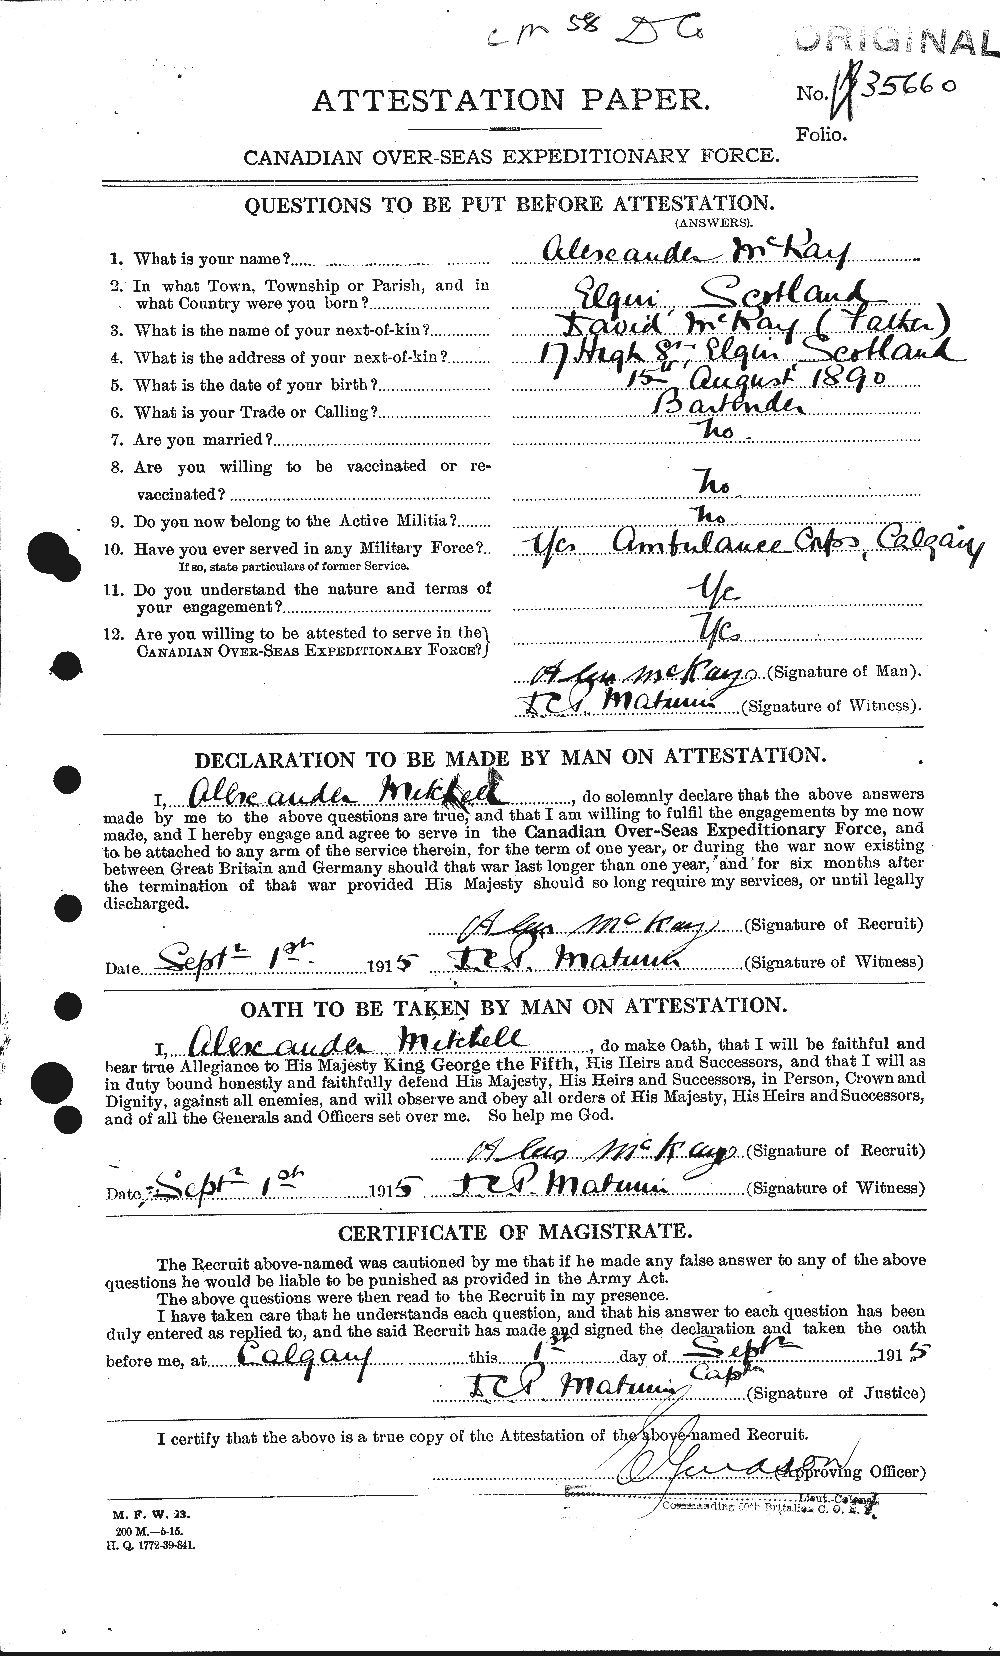 Personnel Records of the First World War - CEF 530904a